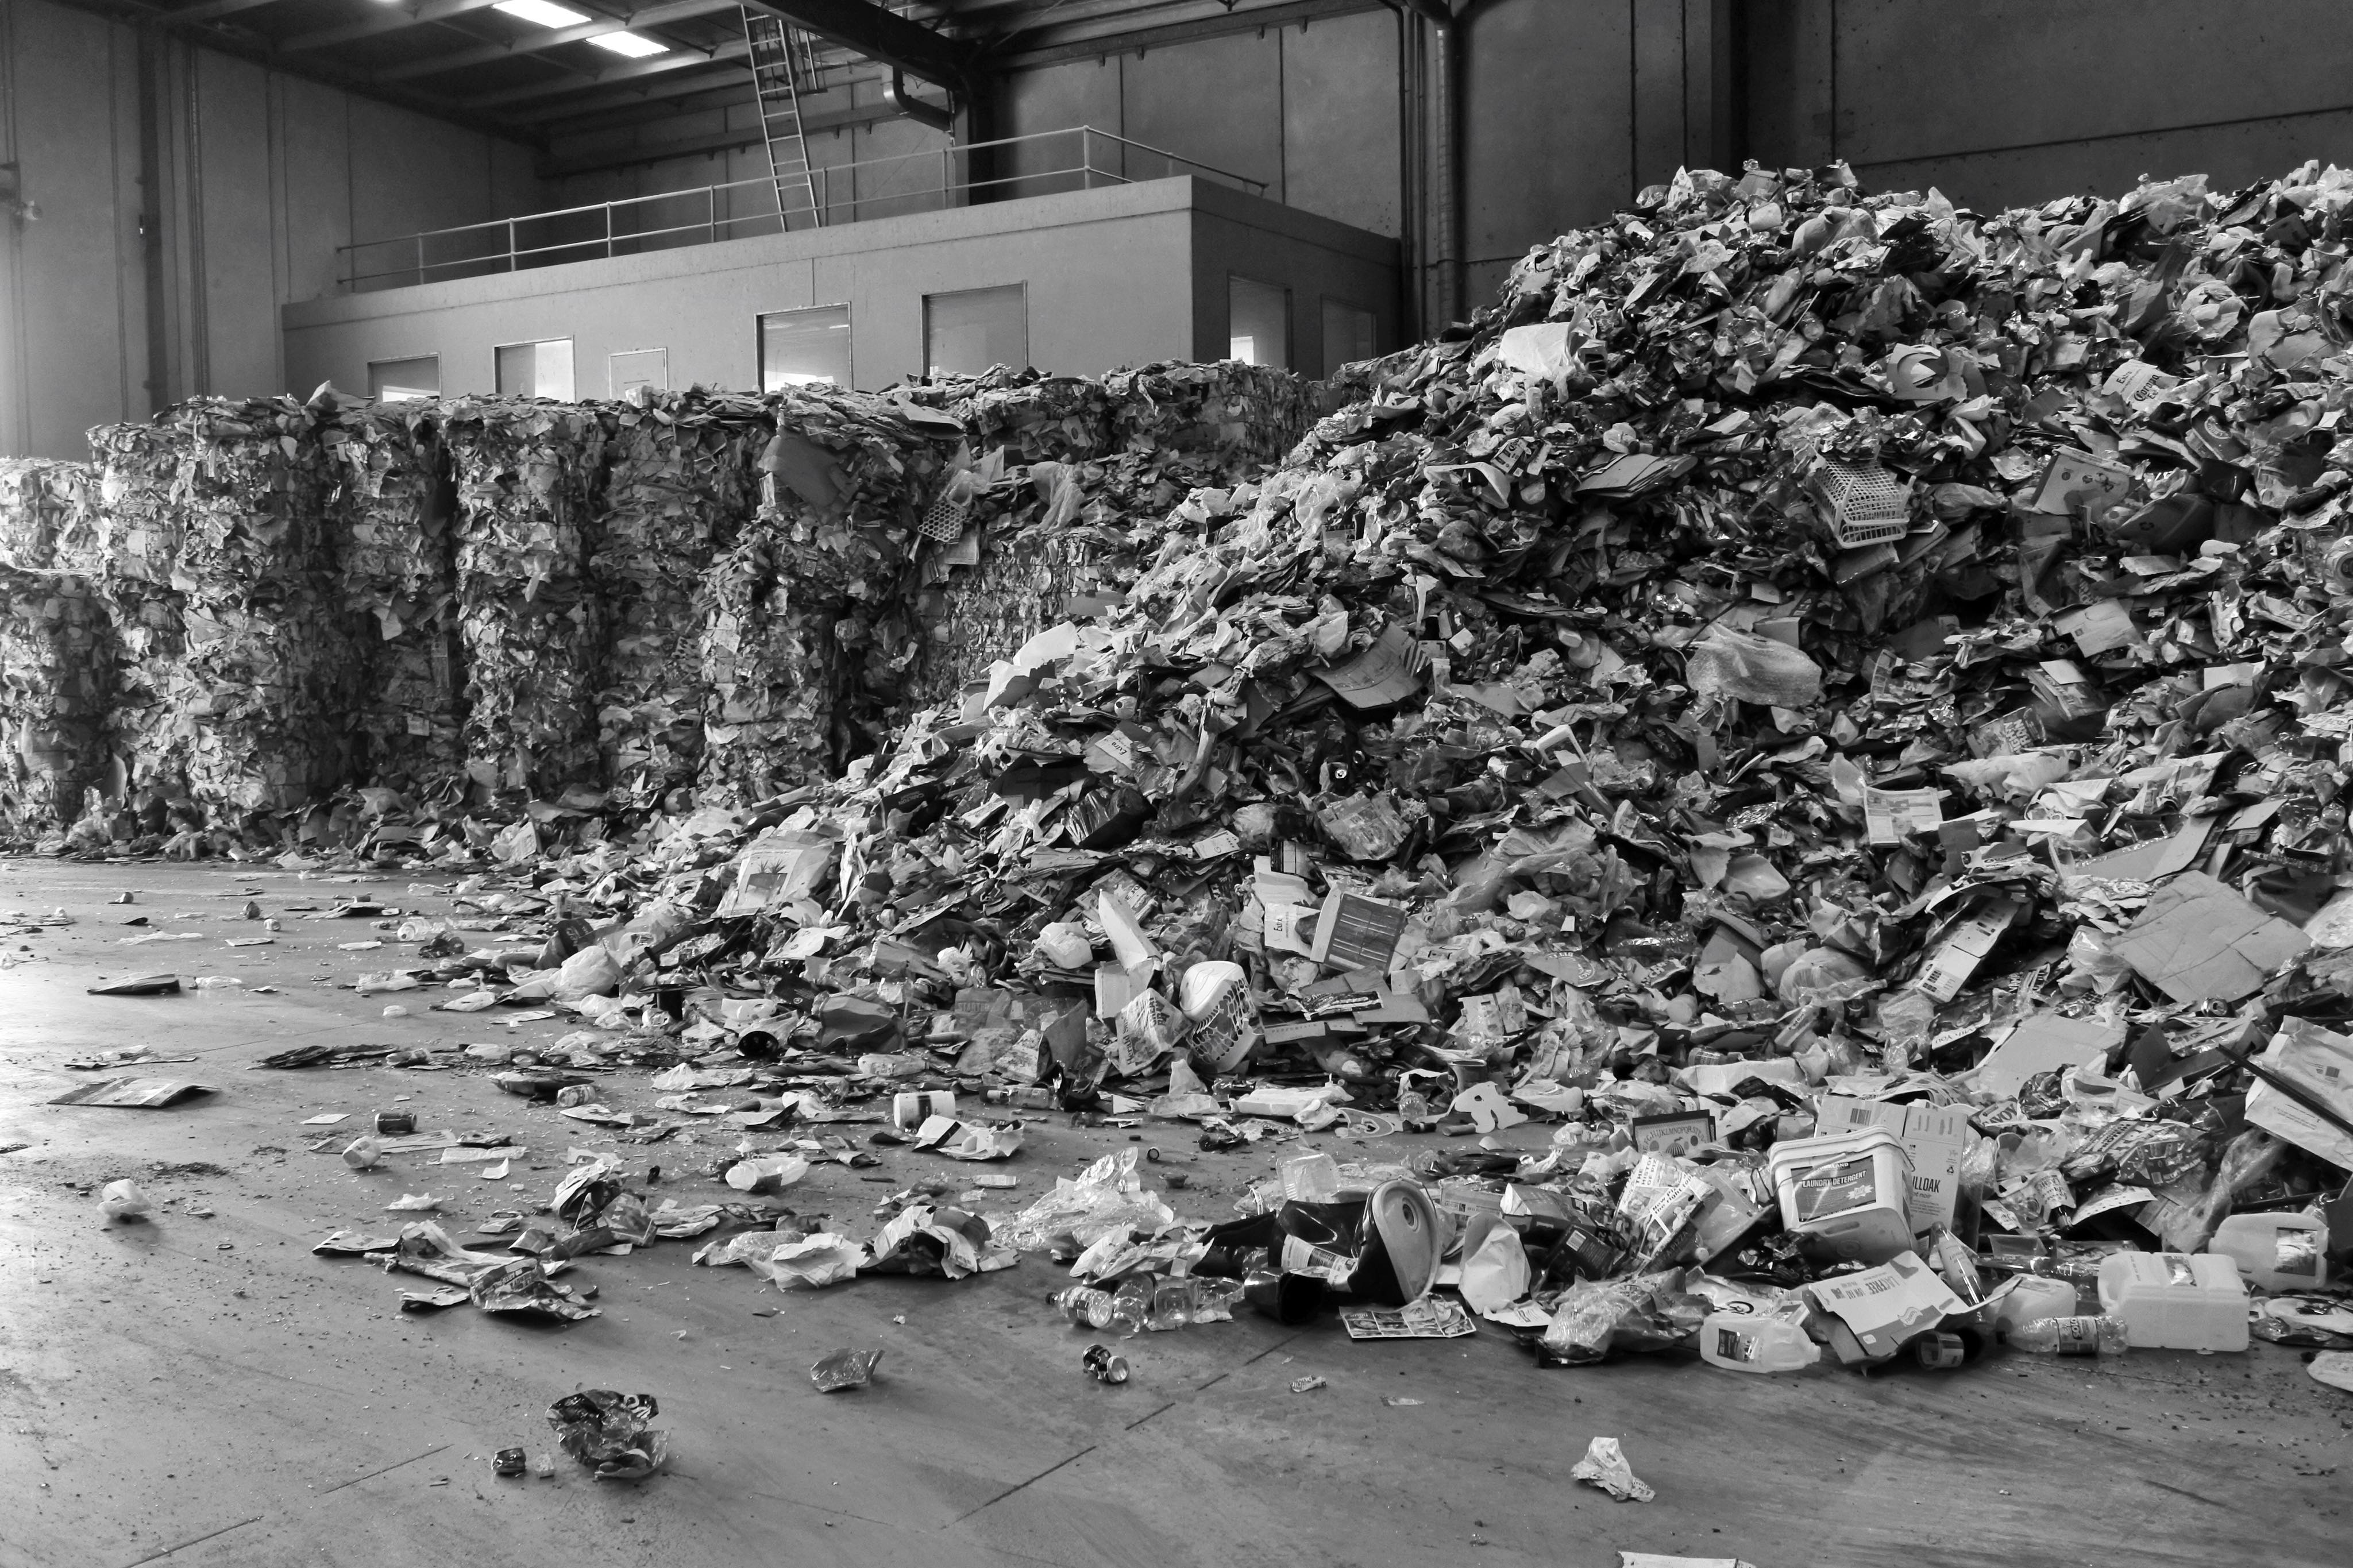 Mt. Non-Recyclable – The Aftermath of China’s Ban on Exporting Waste Products